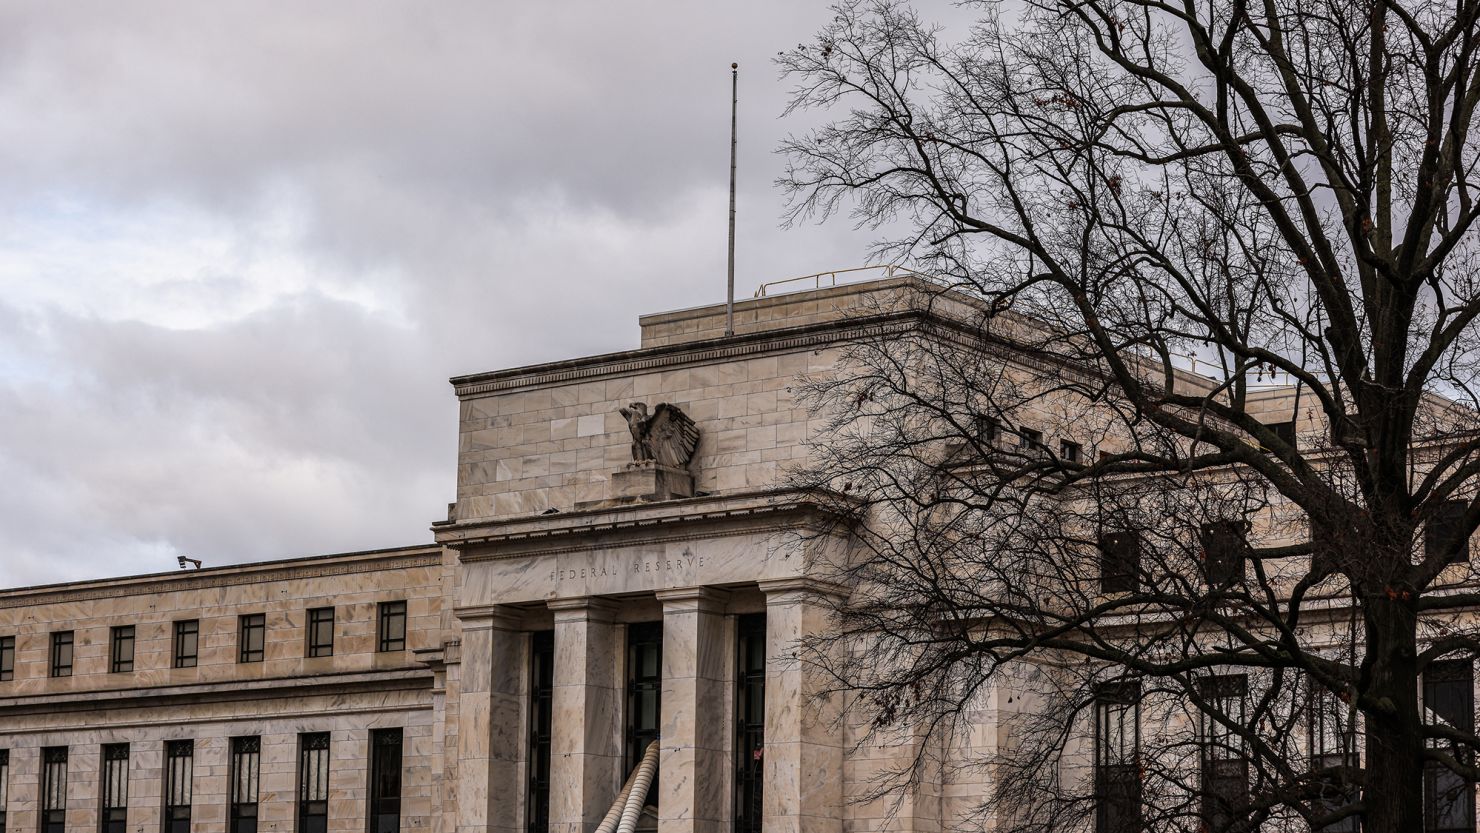 Fed officials said the recent uptick in inflation has been "relatively broad based,” according to minutes from the most recent policy meeting.